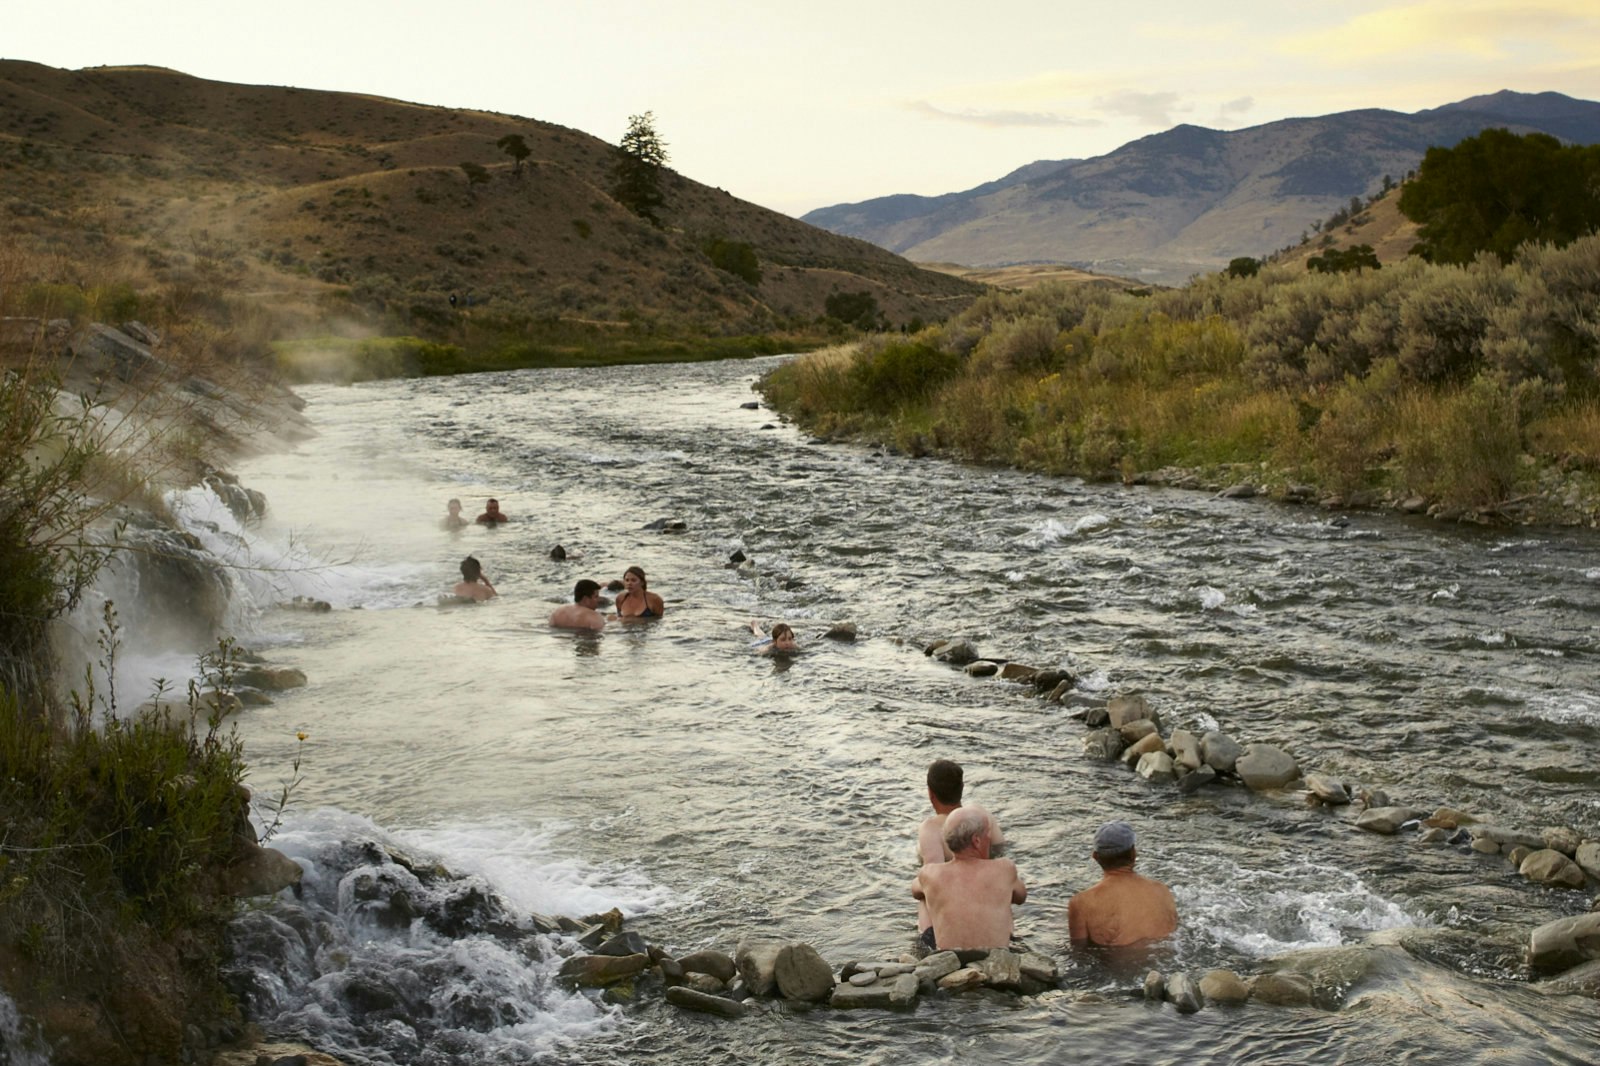 Steam rises from a river as about 15 people sit in the swiftly moving river. National Parks: The best free things to do in the US parks